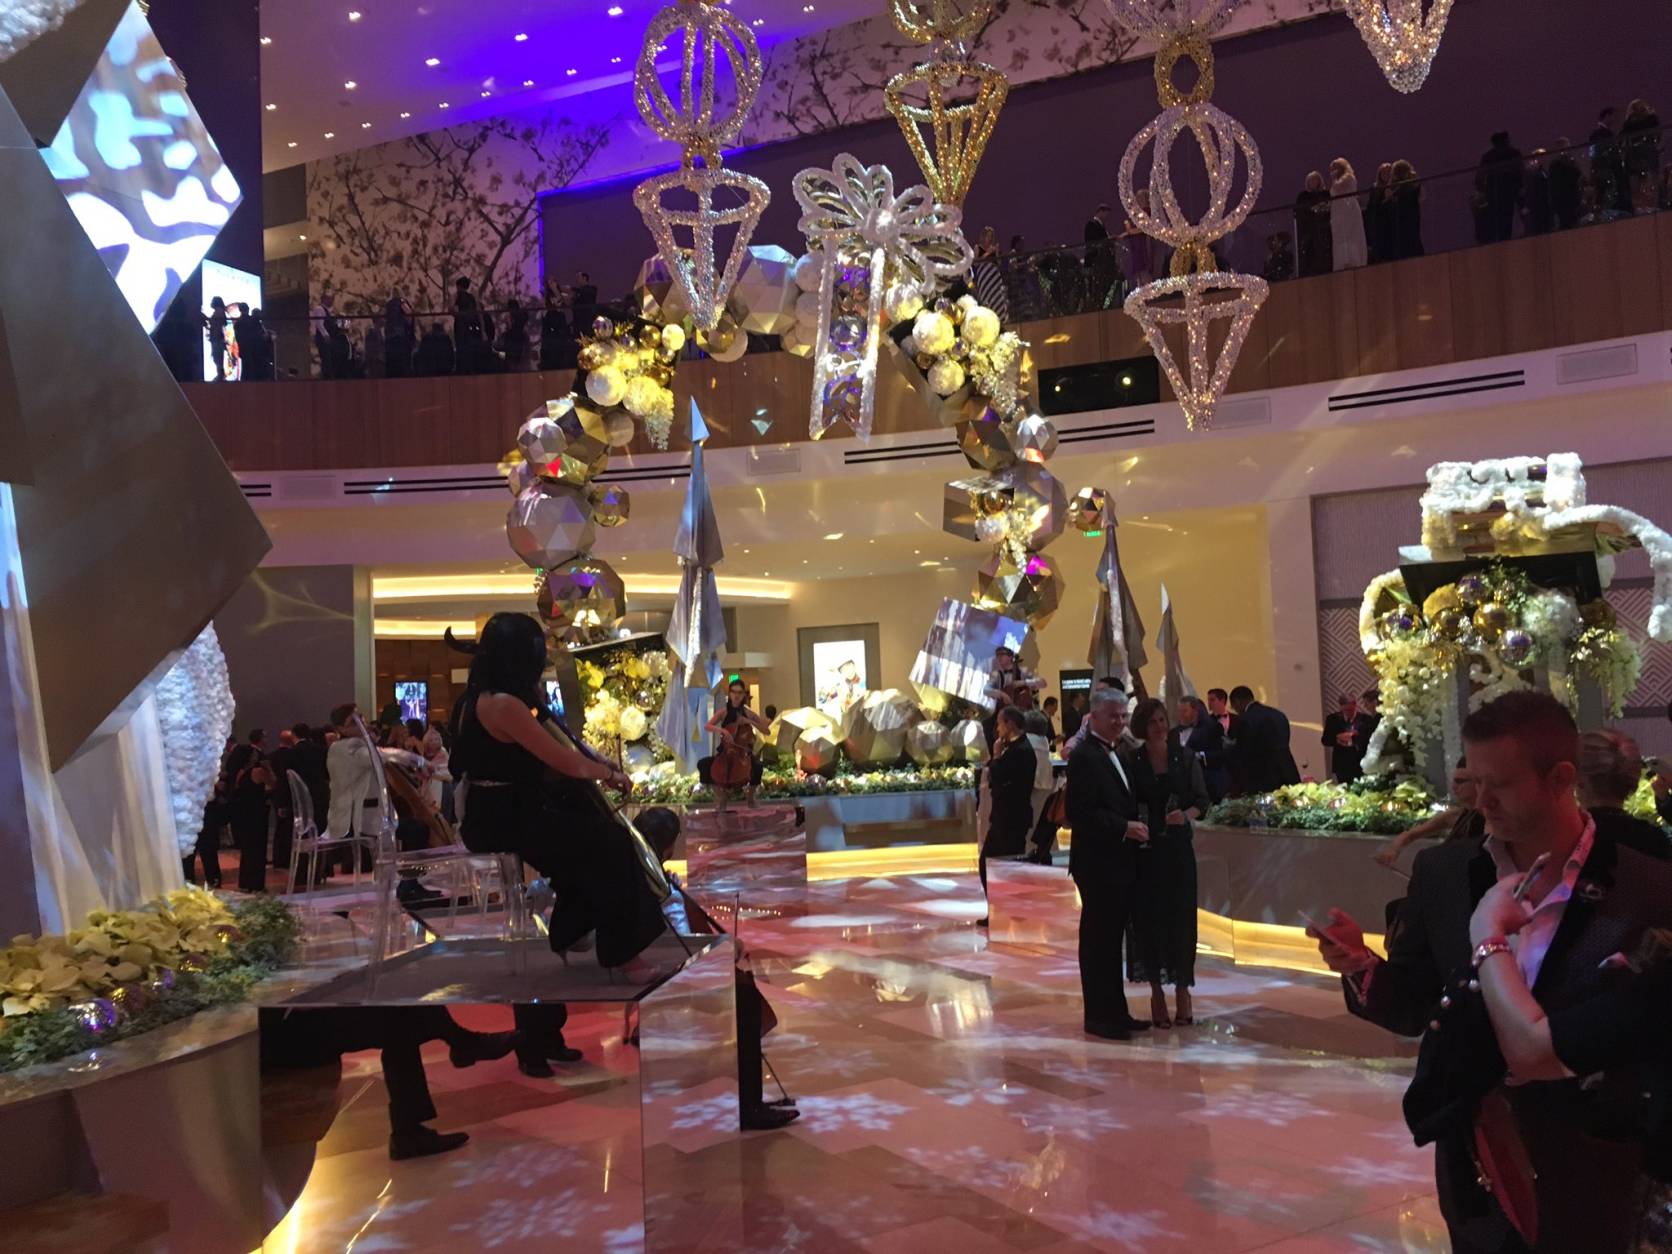 String musicians played in the lobby of the MGM National Harbor opening night. (WTOP/Mike Murillo)